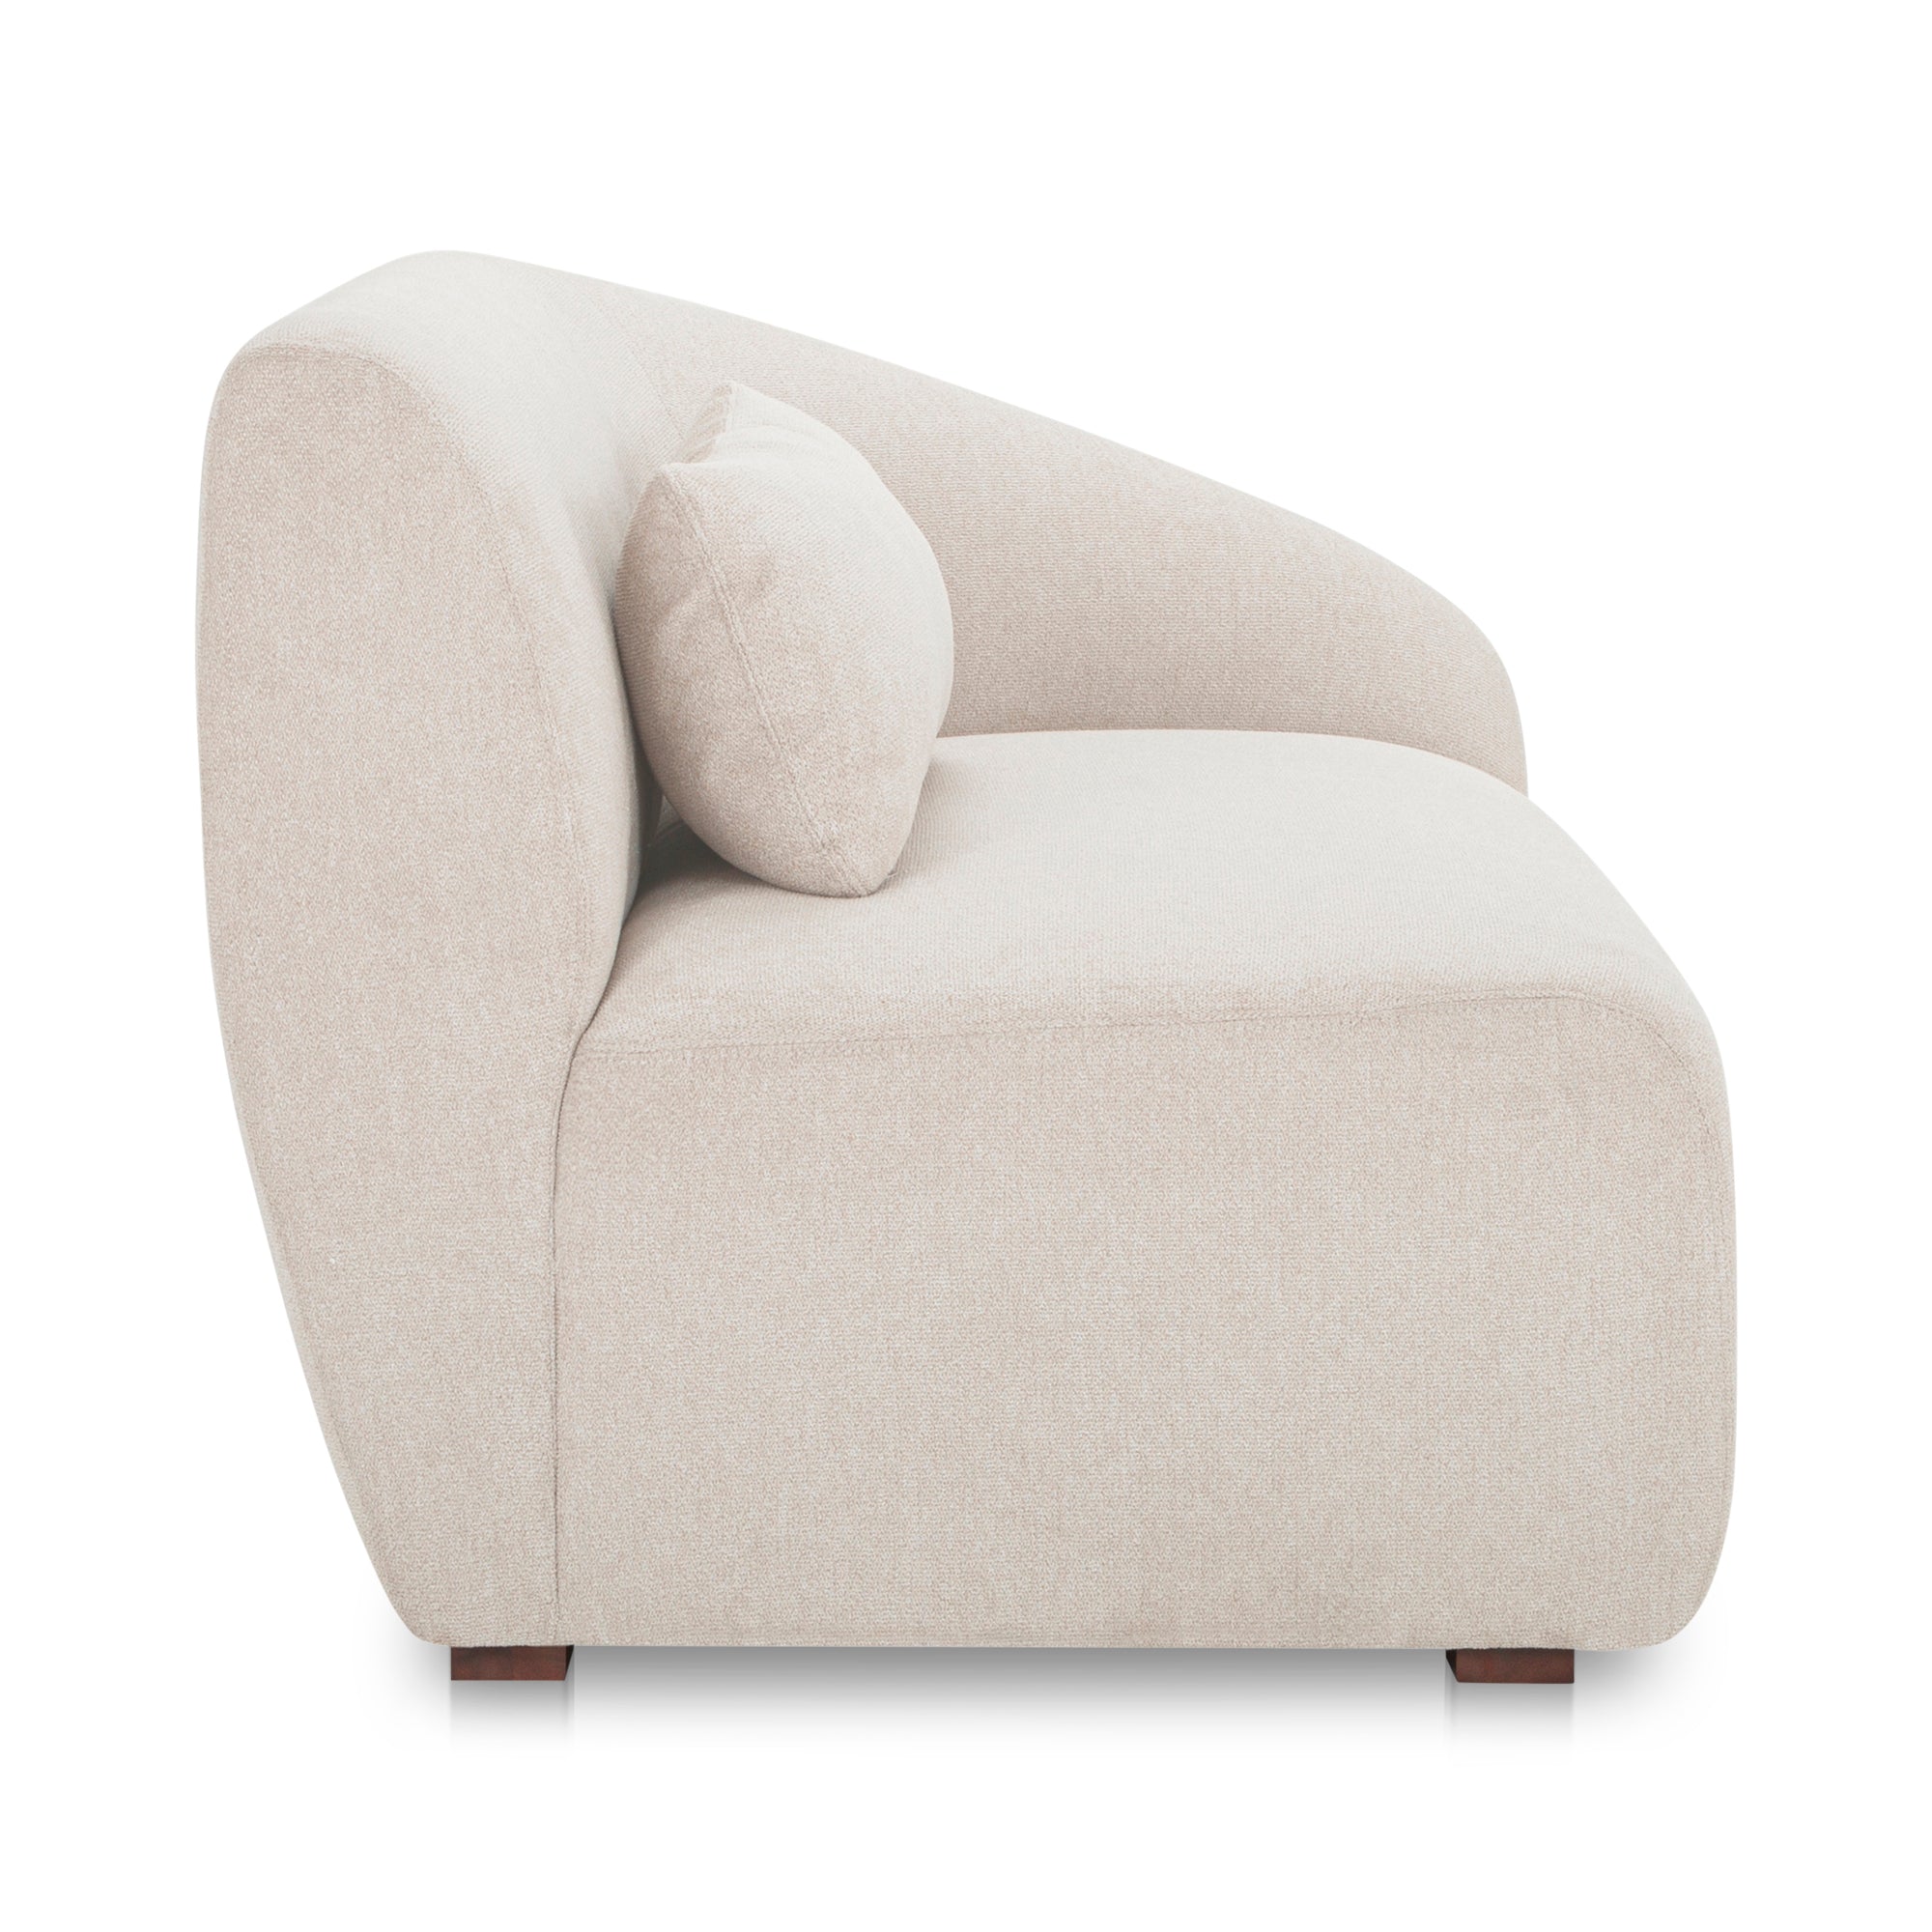 Amelia Right Arm Facing Chair Warm White